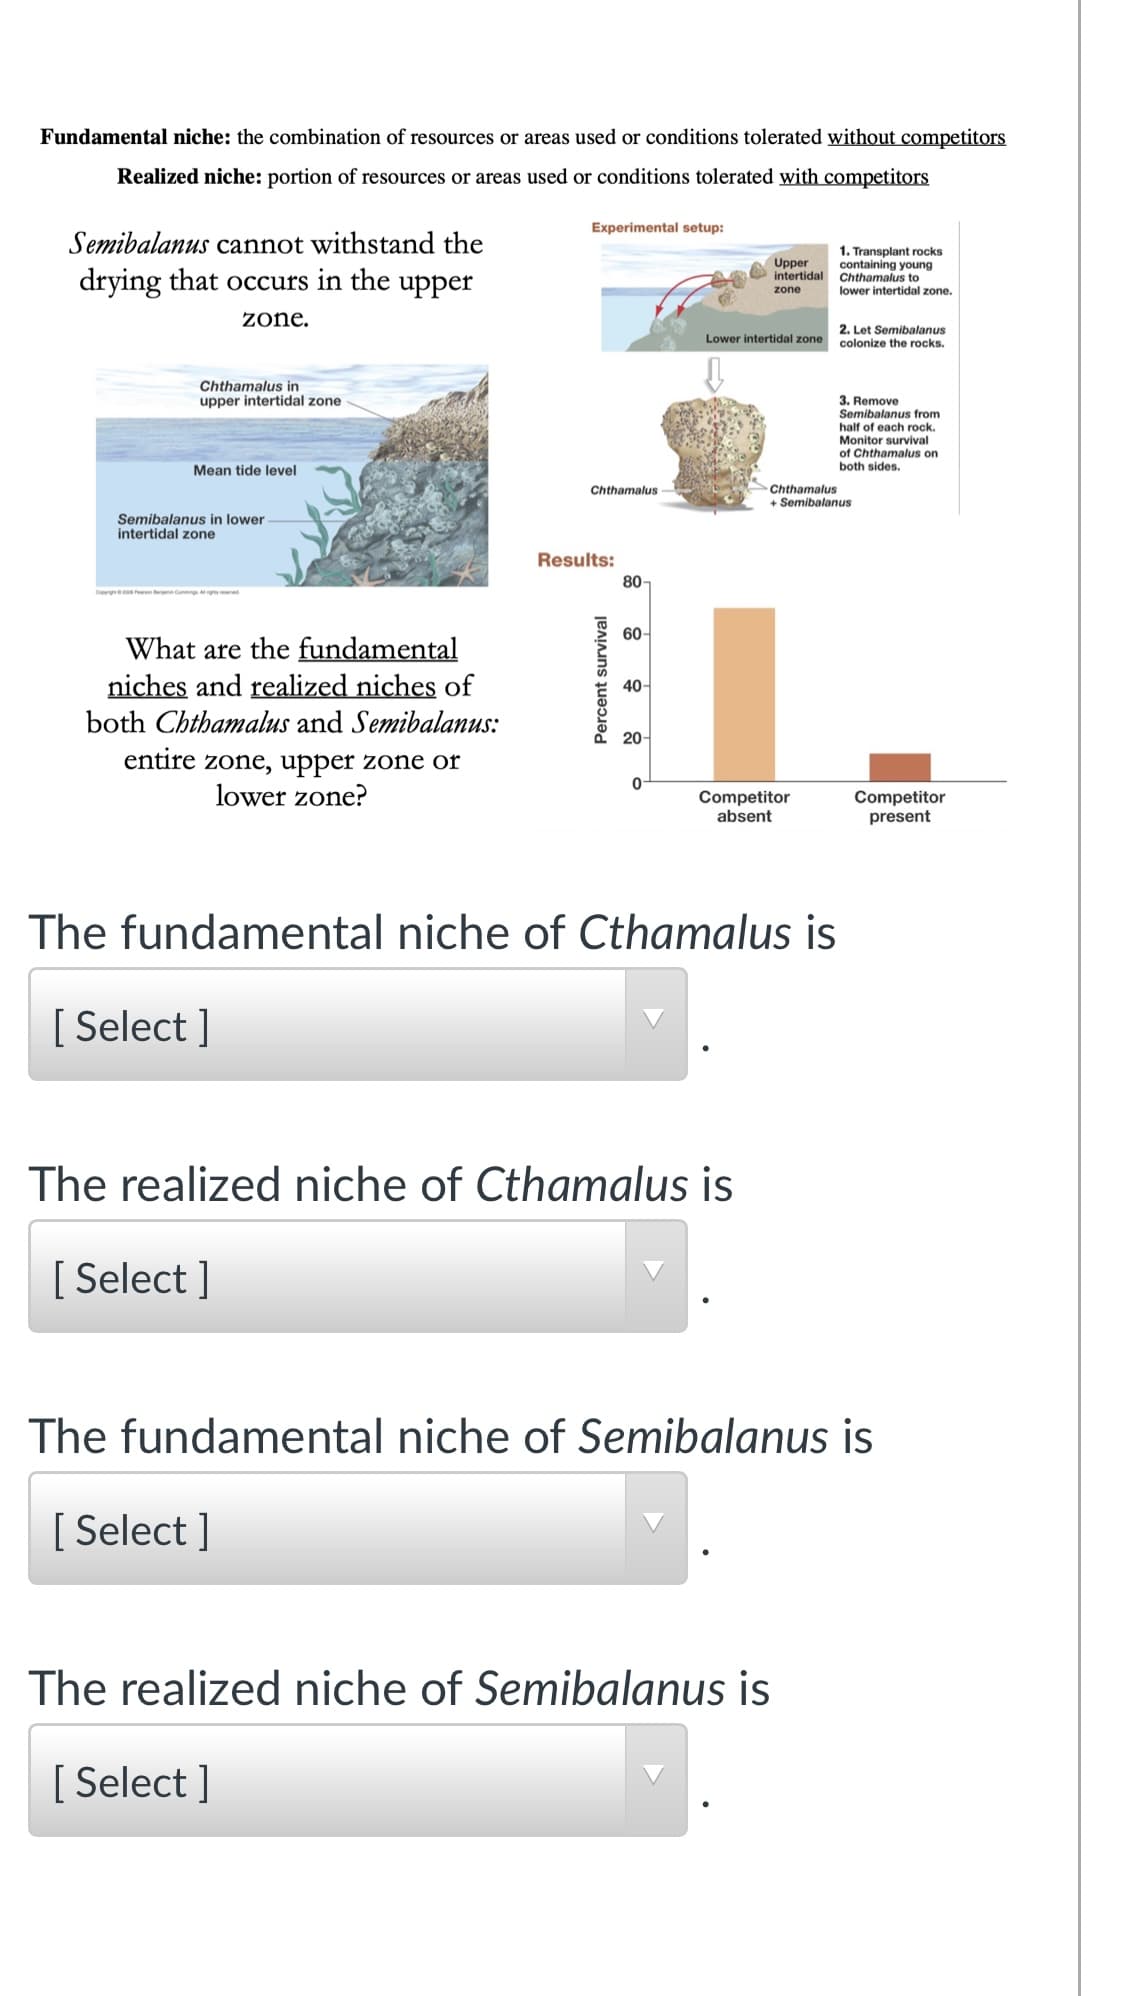 Fundamental niche: the combination of resources or areas used or conditions tolerated without competitors
Realized niche: portion of resources or areas used or conditions tolerated with competitors
Experimental setup:
Semibalanus cannot withstand the
1. Transplant rocks
containing young
intertidal Chthamalus to
lower intertidal zone.
Upper
drying that occurs in the upper
zone
zone.
2. Let Semibalanus
Lower intertidal zone
colonize the rocks.
Chthamalus in
upper intertidal zone
3. Remove
Semibalanus from
half of each rock.
Monitor survival
of Chthamalus on
both sides.
Mean tide level
Chthamalus
Chthamalus
+ Semibalanus
Semibalanus in lower-
intertidal zone
Results:
80-
60-
What are the fundamental
niches and realized niches of
40-
both Chthamalus and Semibalanus:
20-
entire zone, upper zone or
lower zone?
0-
Competitor
absent
Competitor
present
The fundamental niche of Cthamalus is
[ Select ]
The realized niche of Cthamalus is
[ Select ]
The fundamental niche of Semibalanus is
[ Select ]
The realized niche of Semibalanus is
[ Select ]
Percent survival
